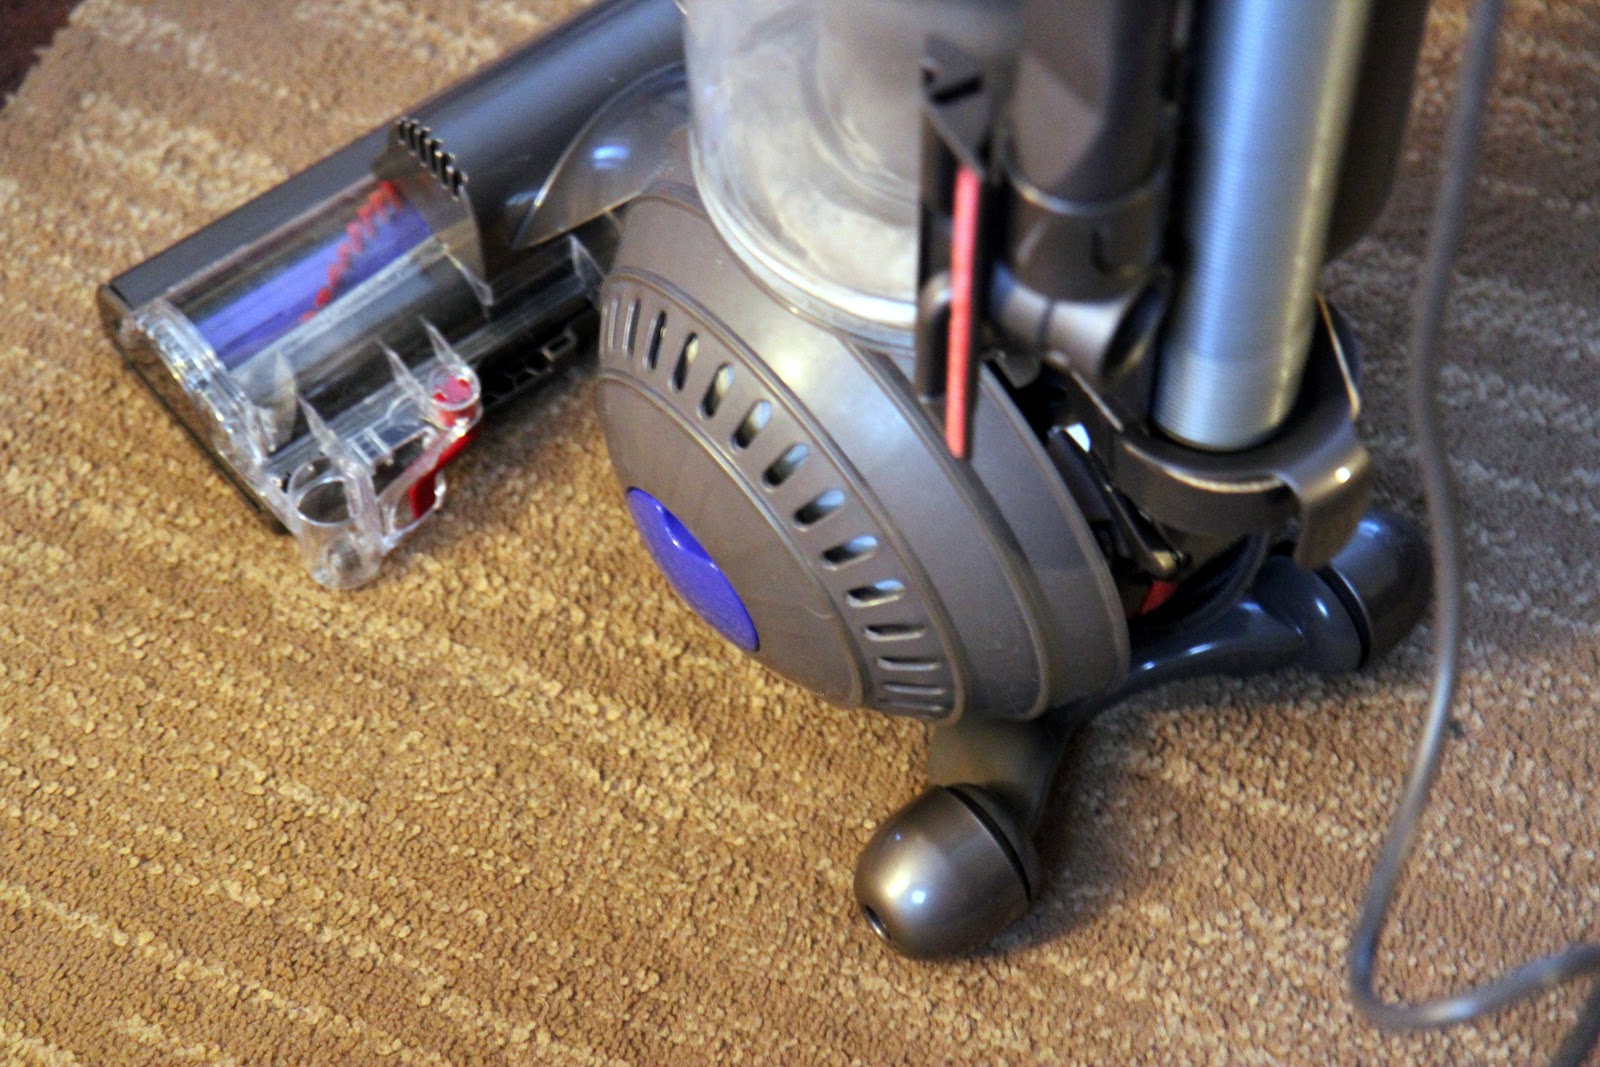 Review of the Dyson - Ball Animal Bagless Upright Vacuum